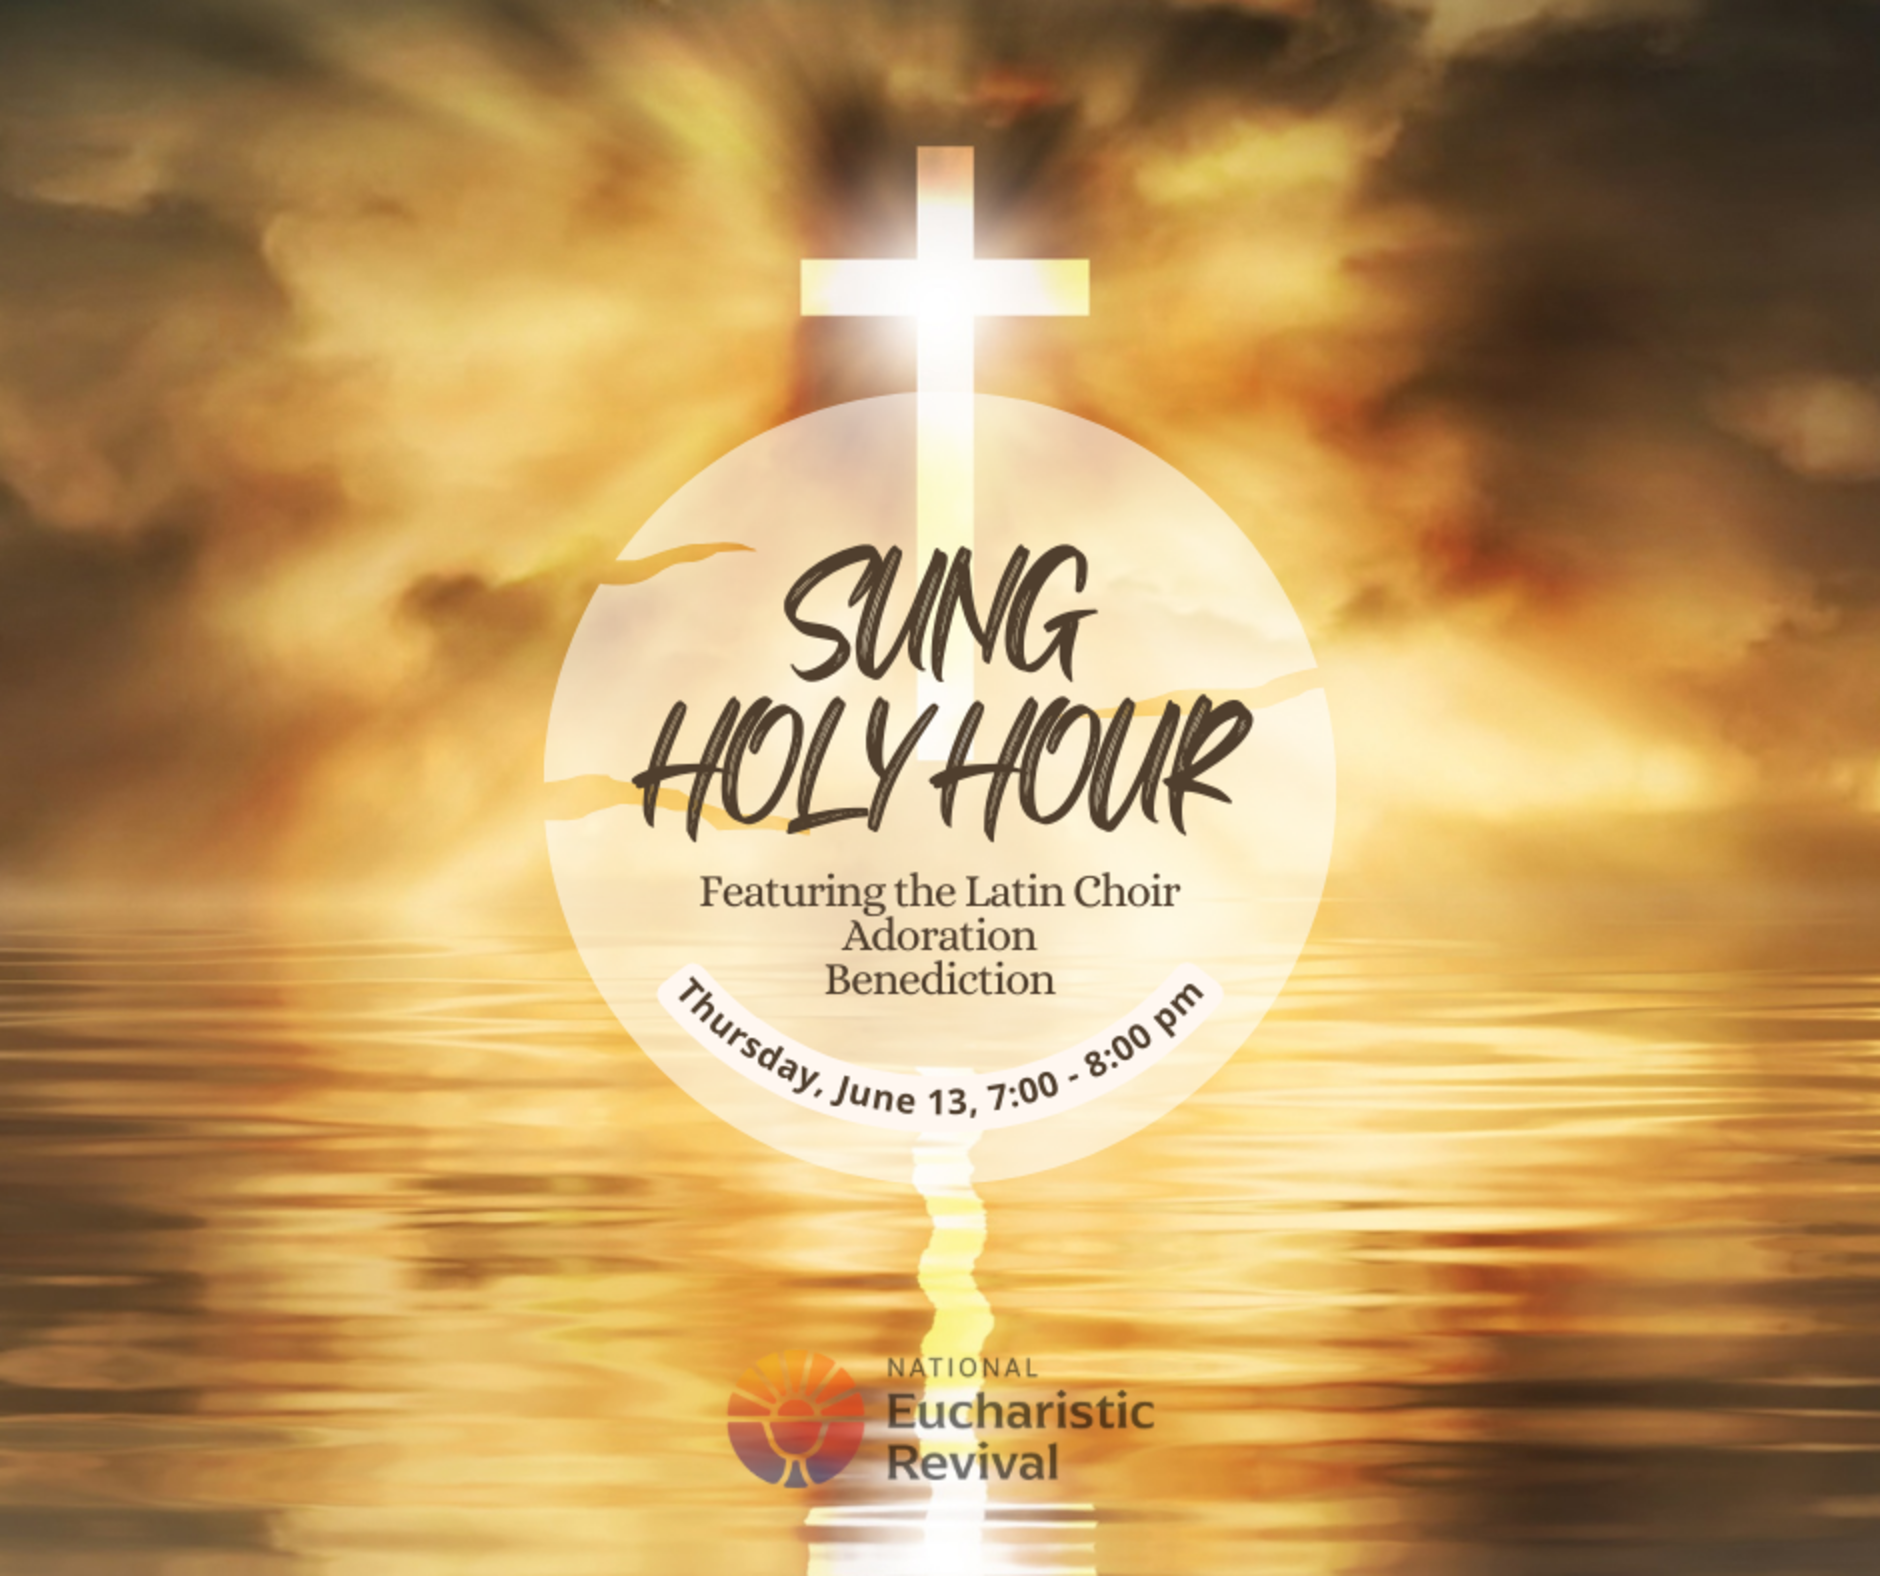 Sung Holy Hour